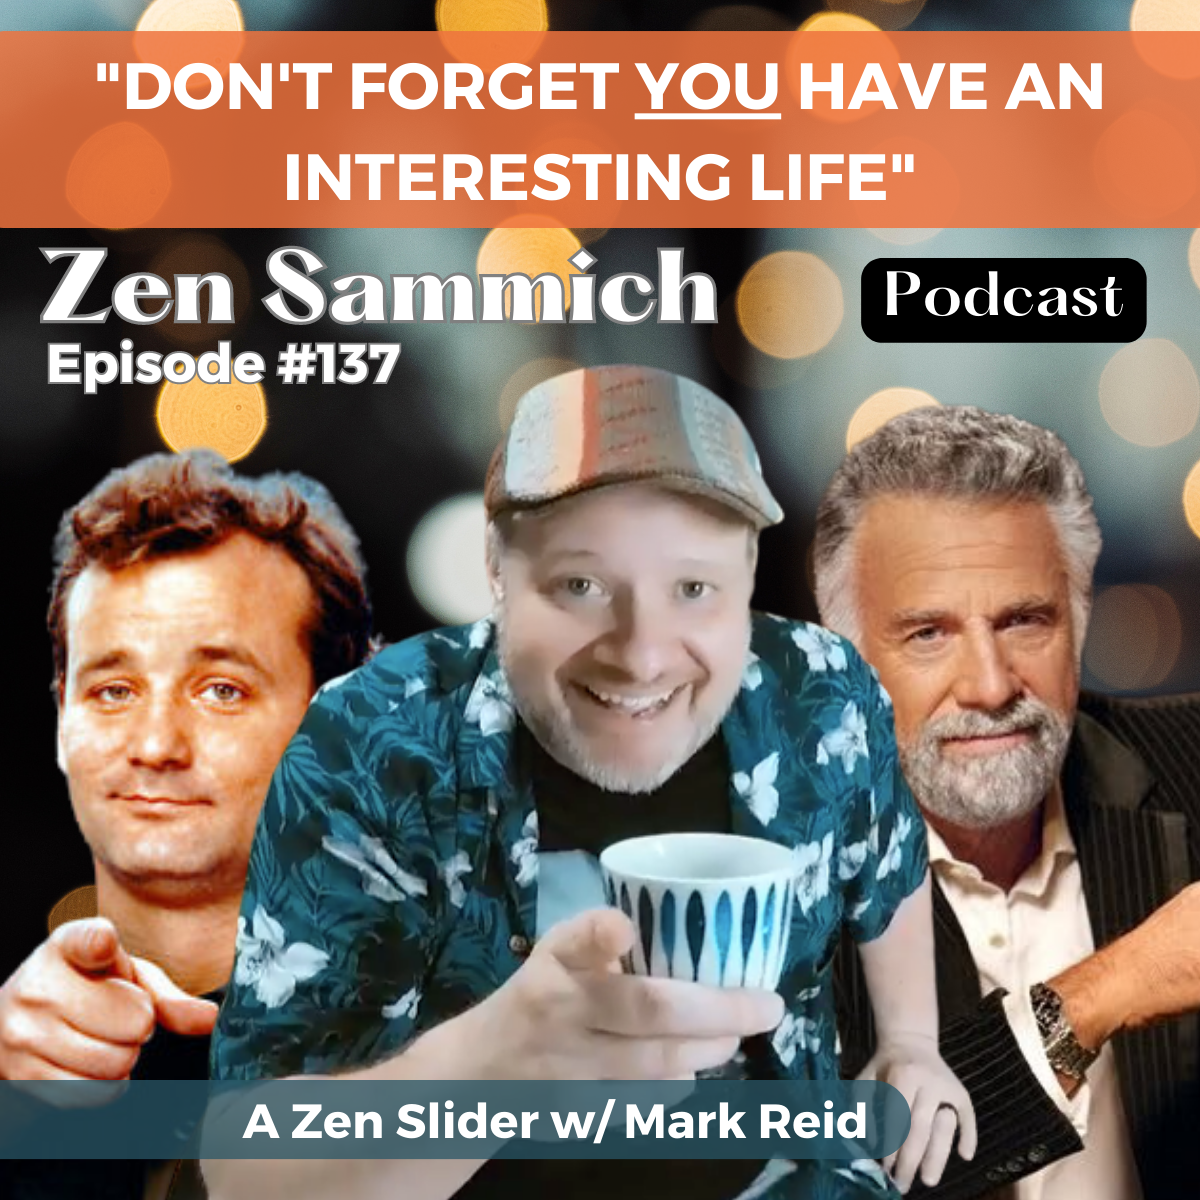 You have an interesting life Zen Sammich